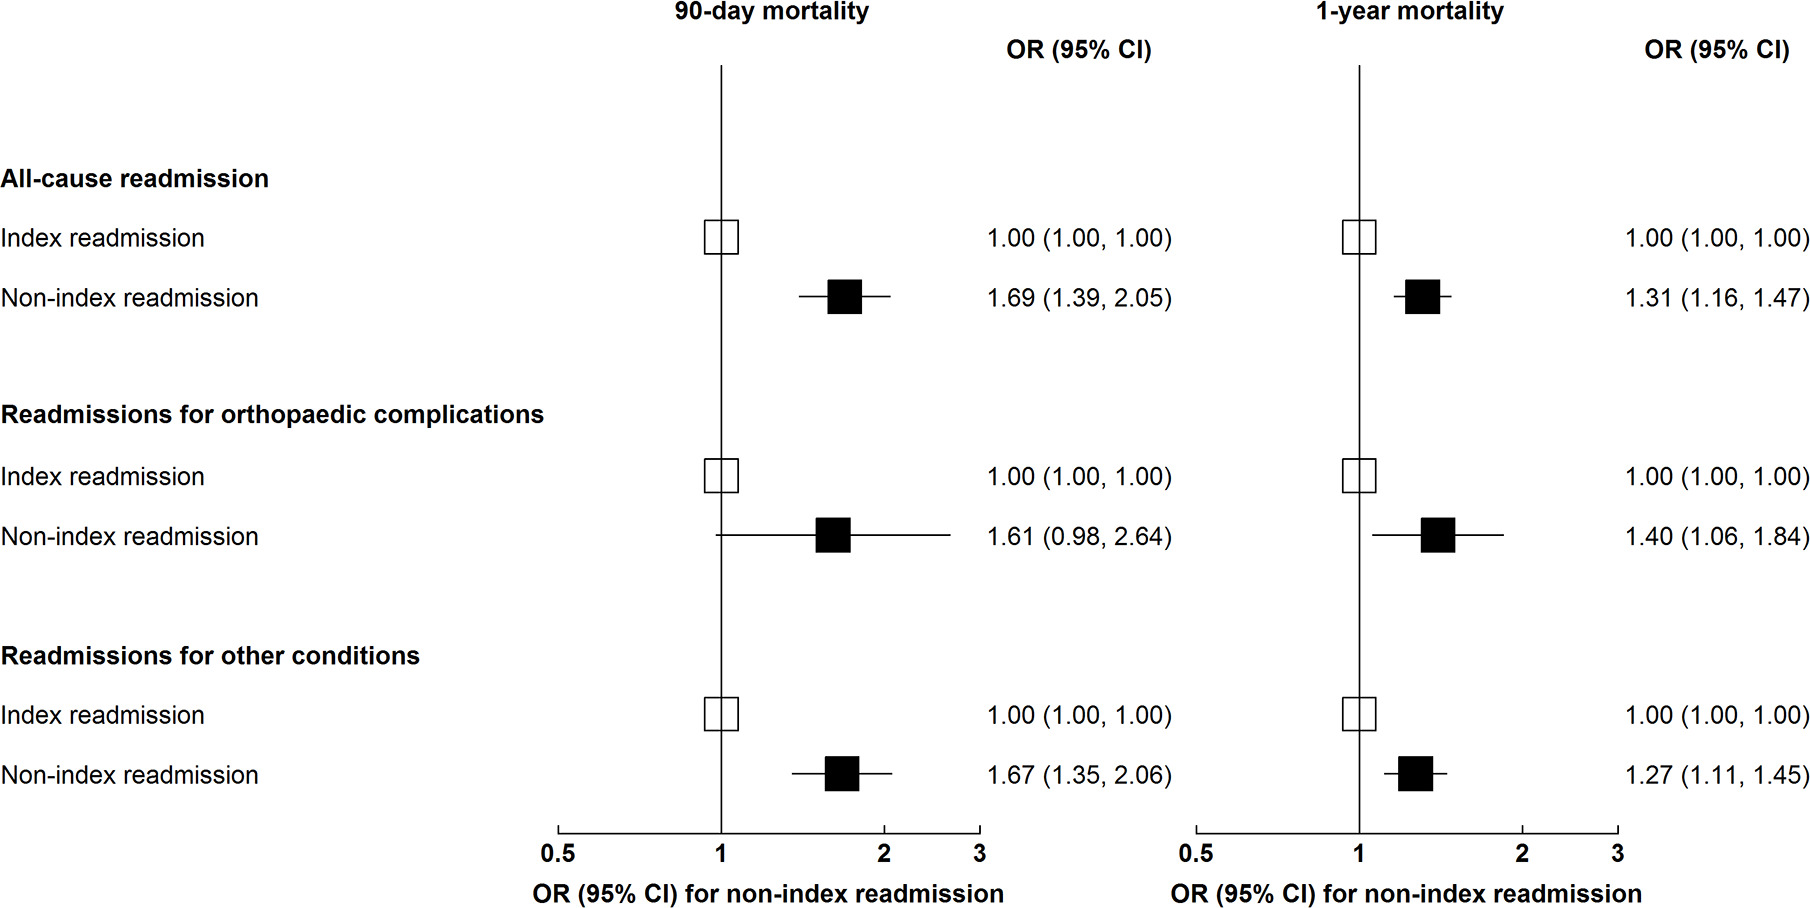 Fig. 3 
          Associations of non-index readmission with 90-day and one-year mortality, overall and by cause of readmission. *Models were adjusted for age, sex, procedure type, socioeconomic status, regionality, private insurance, readmission cause, comorbidities, and hospital funding type, as appropriate. Odds ratios are shown as empty squares for reference groups and as black squares for other groups. Lines indicate corresponding 95% confidence intervals.
        